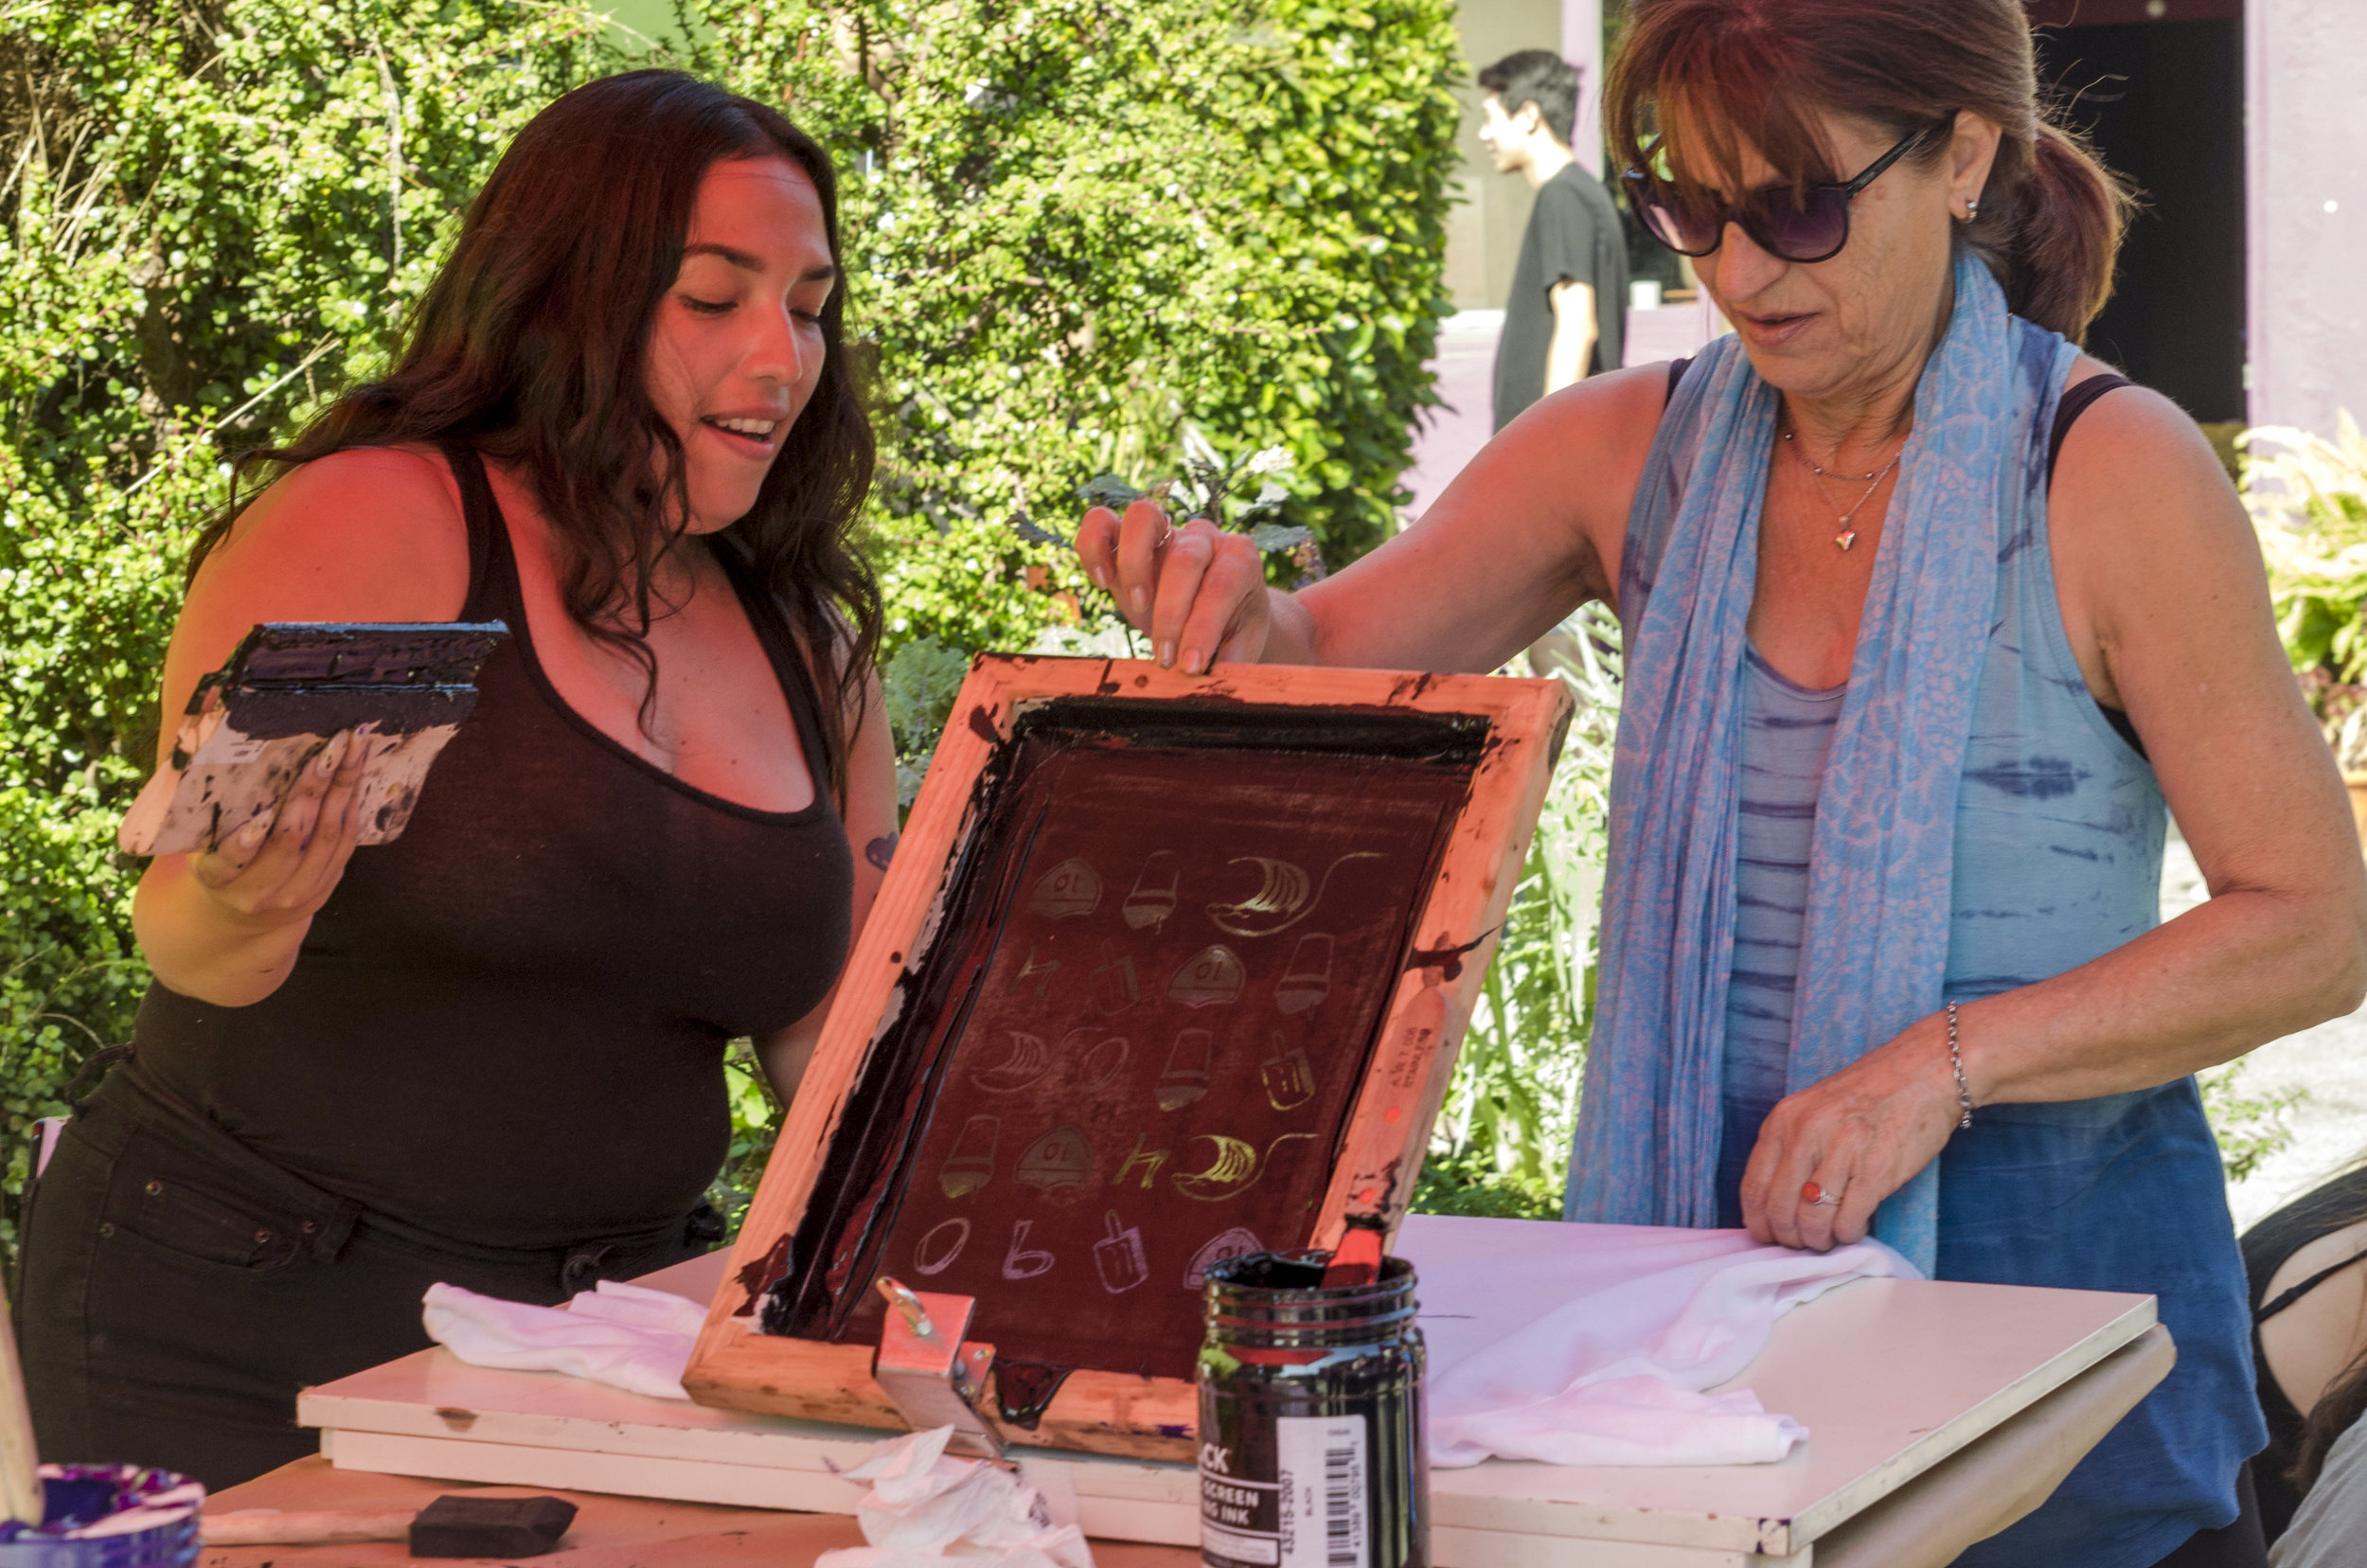  Free T-shirts to screen print were done at the Pico Block Party. Christina Saucedo (left) showing a participant of the Pico Block Party how to screen print. 18th Street Art Center on 18th and Olympic. Santa Monica, Calif. October 14, 2017. (Photo by